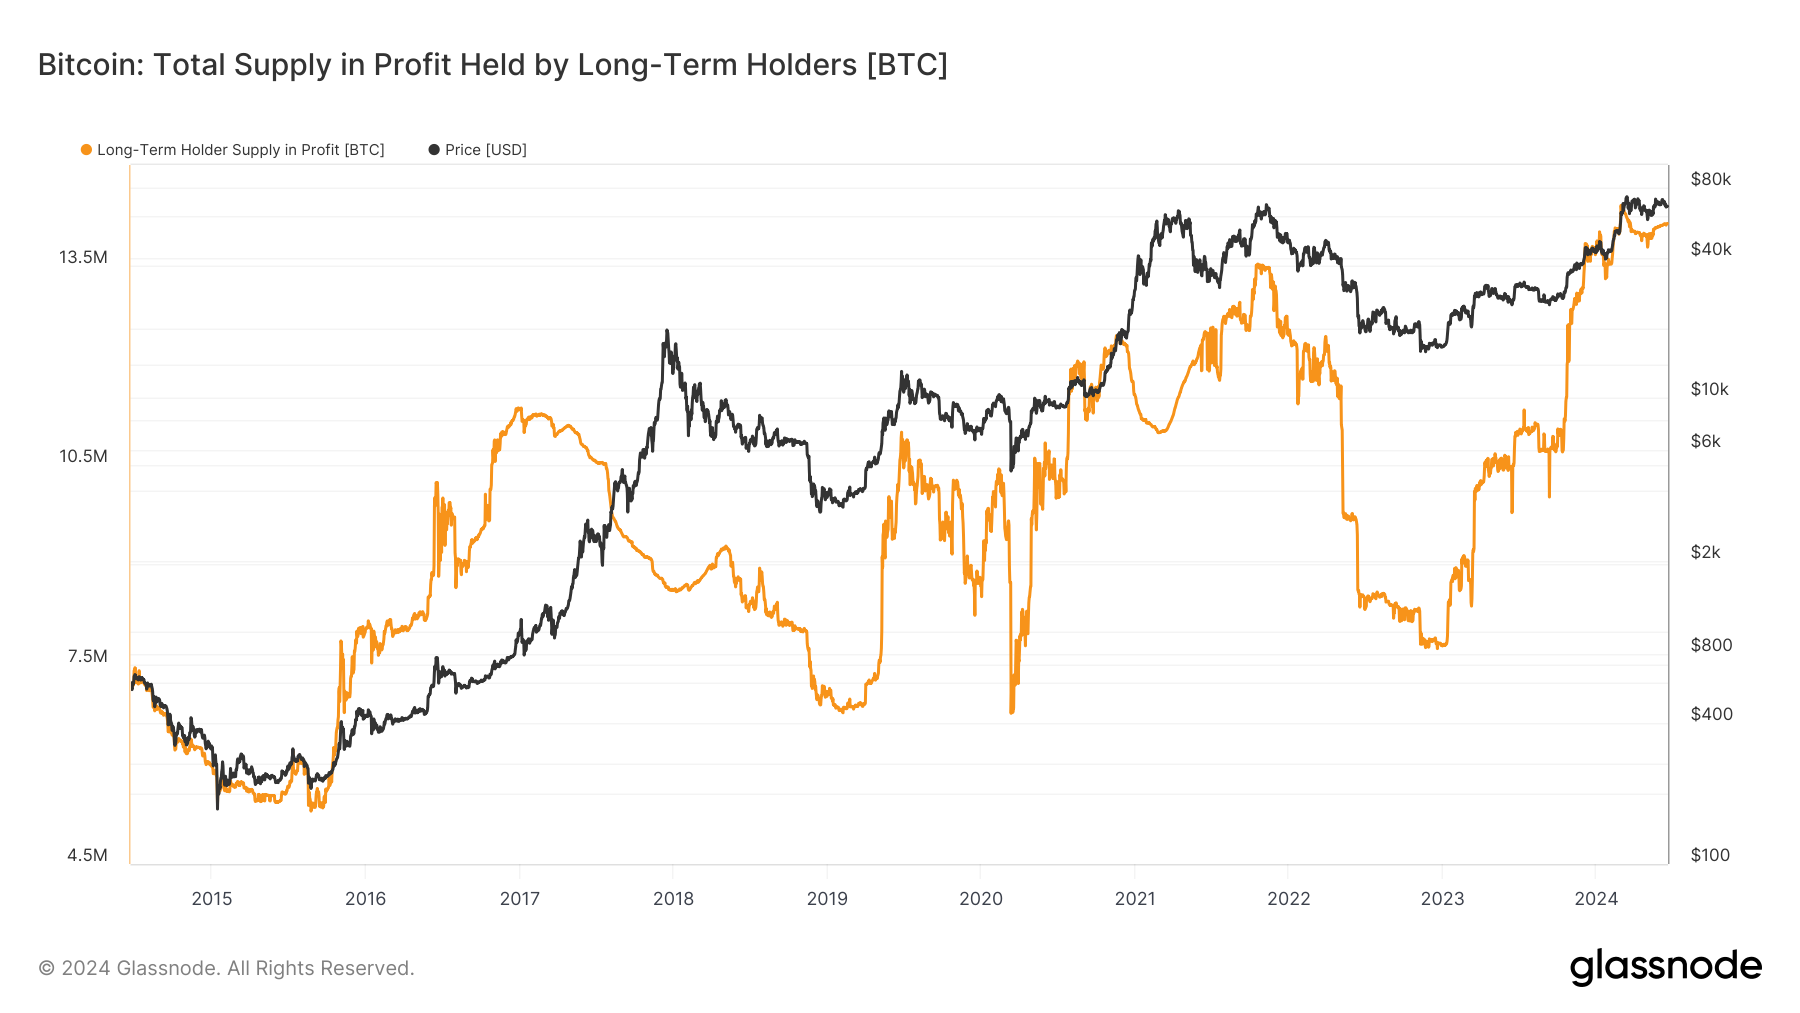 Bitcoin long-term holders’ supply in profit holds above 14 million BTC